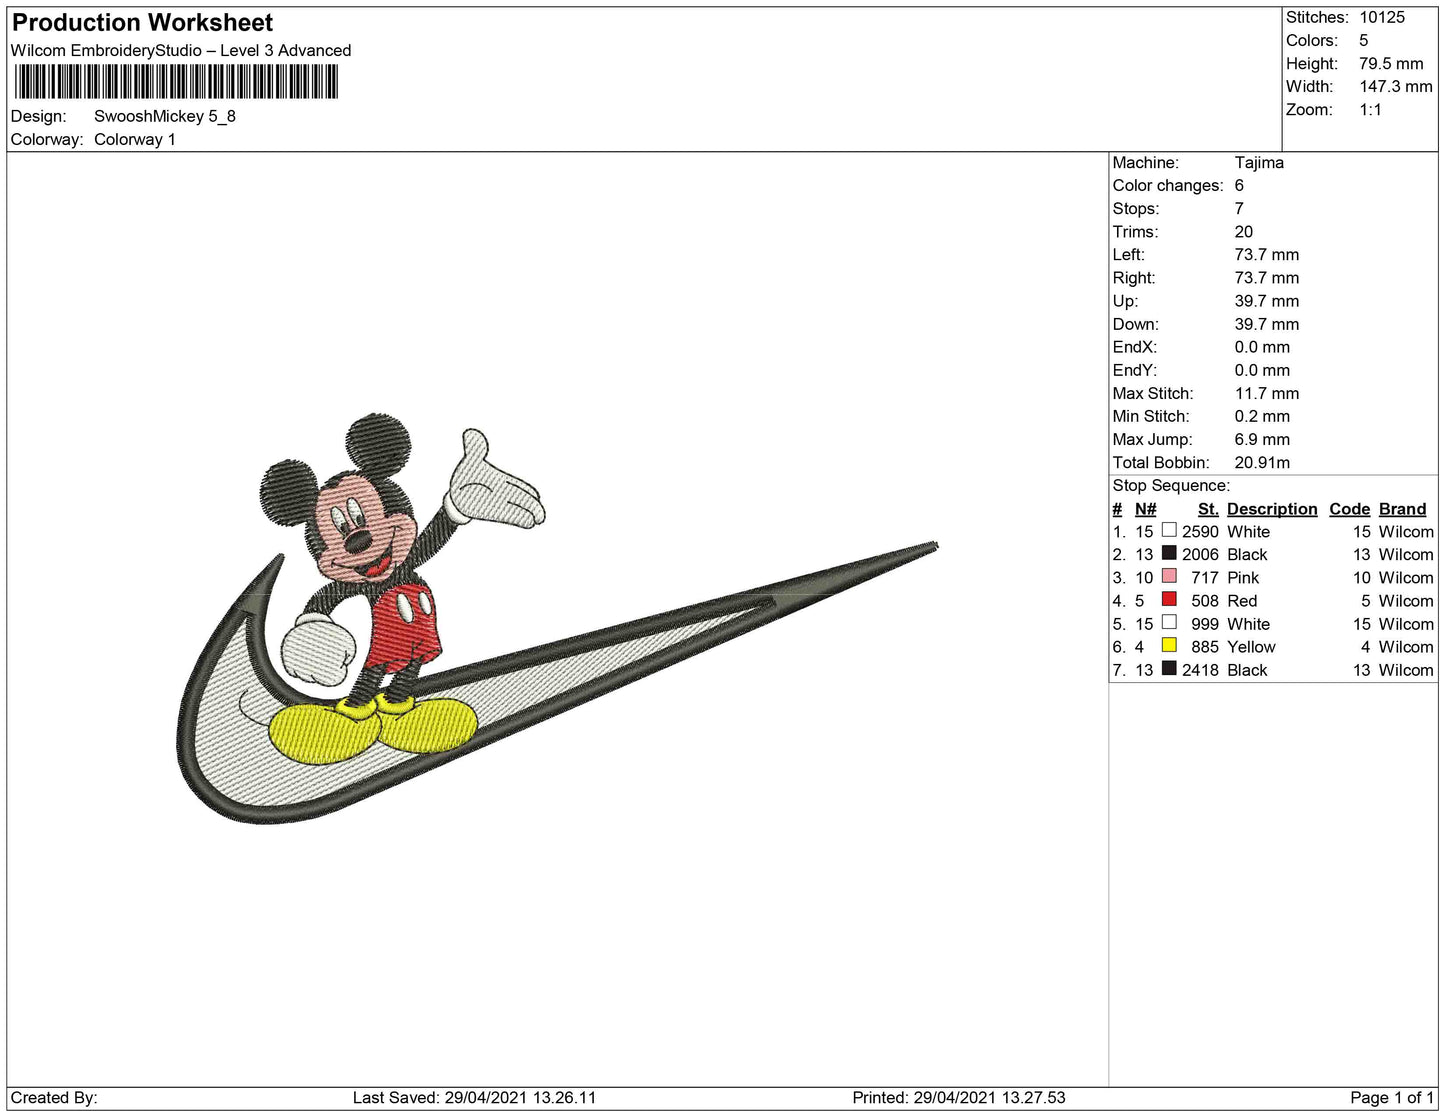 Swoosh Mickey Mouse